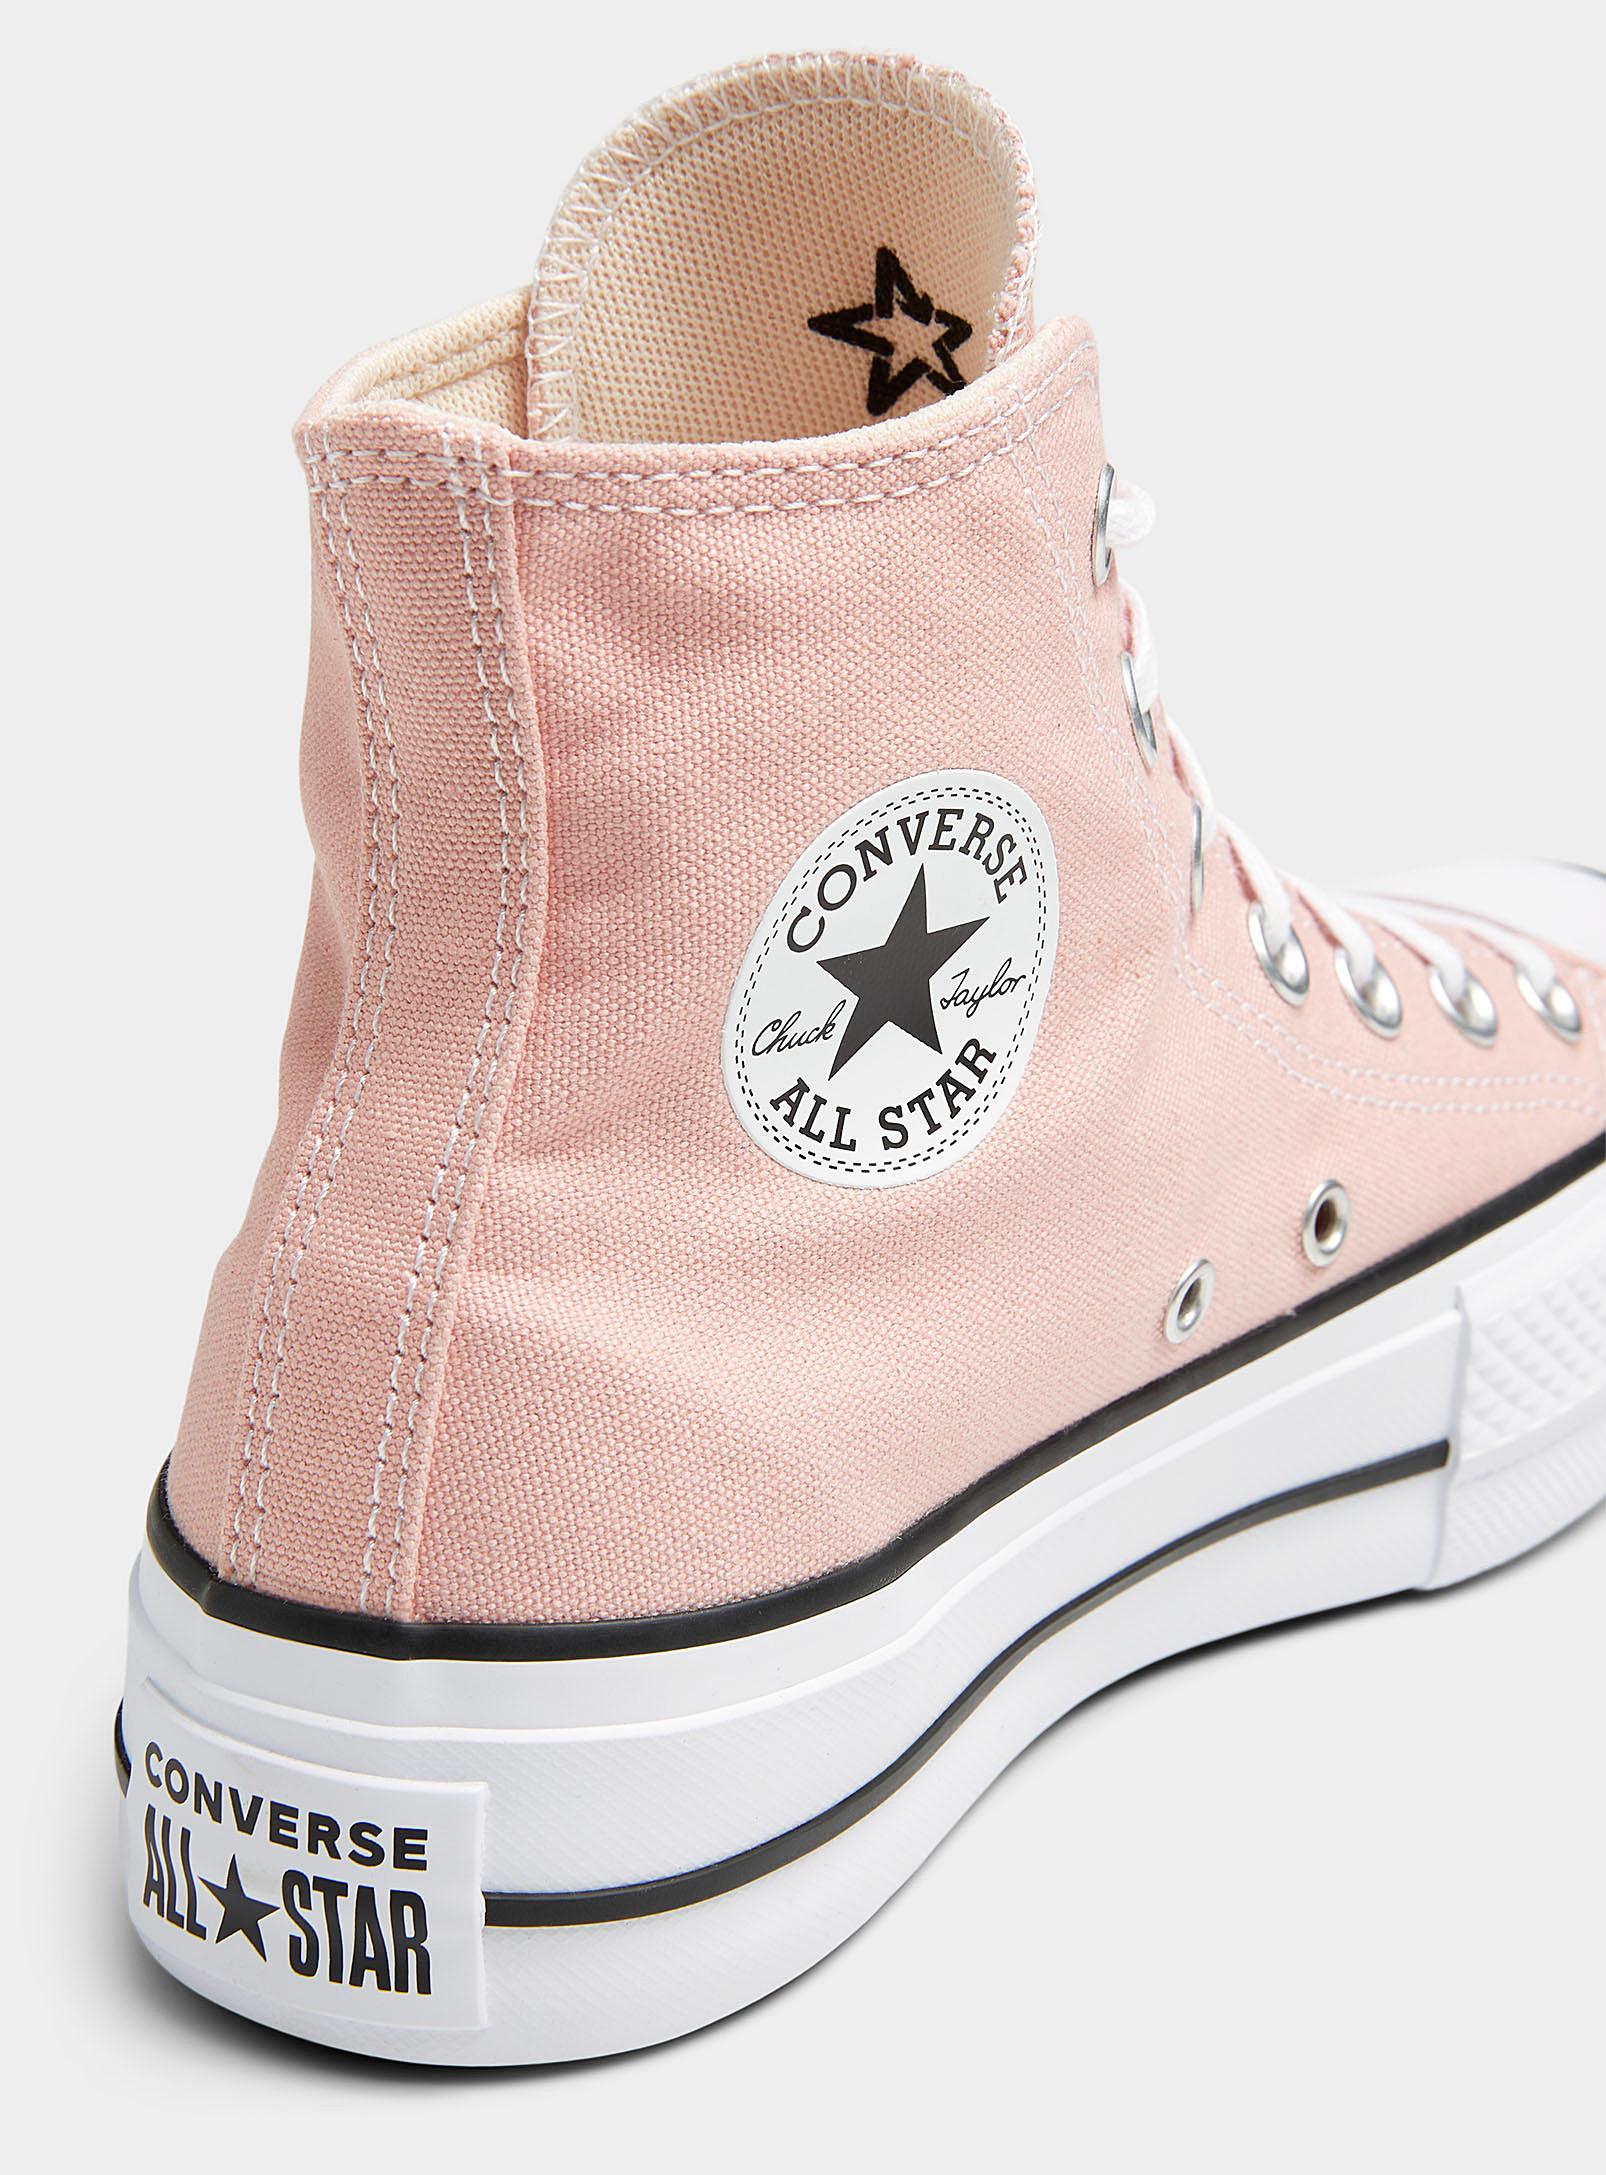 Converse Chuck Taylor All Star High Top Pink Clay Platform Sneakers Women |  Lyst